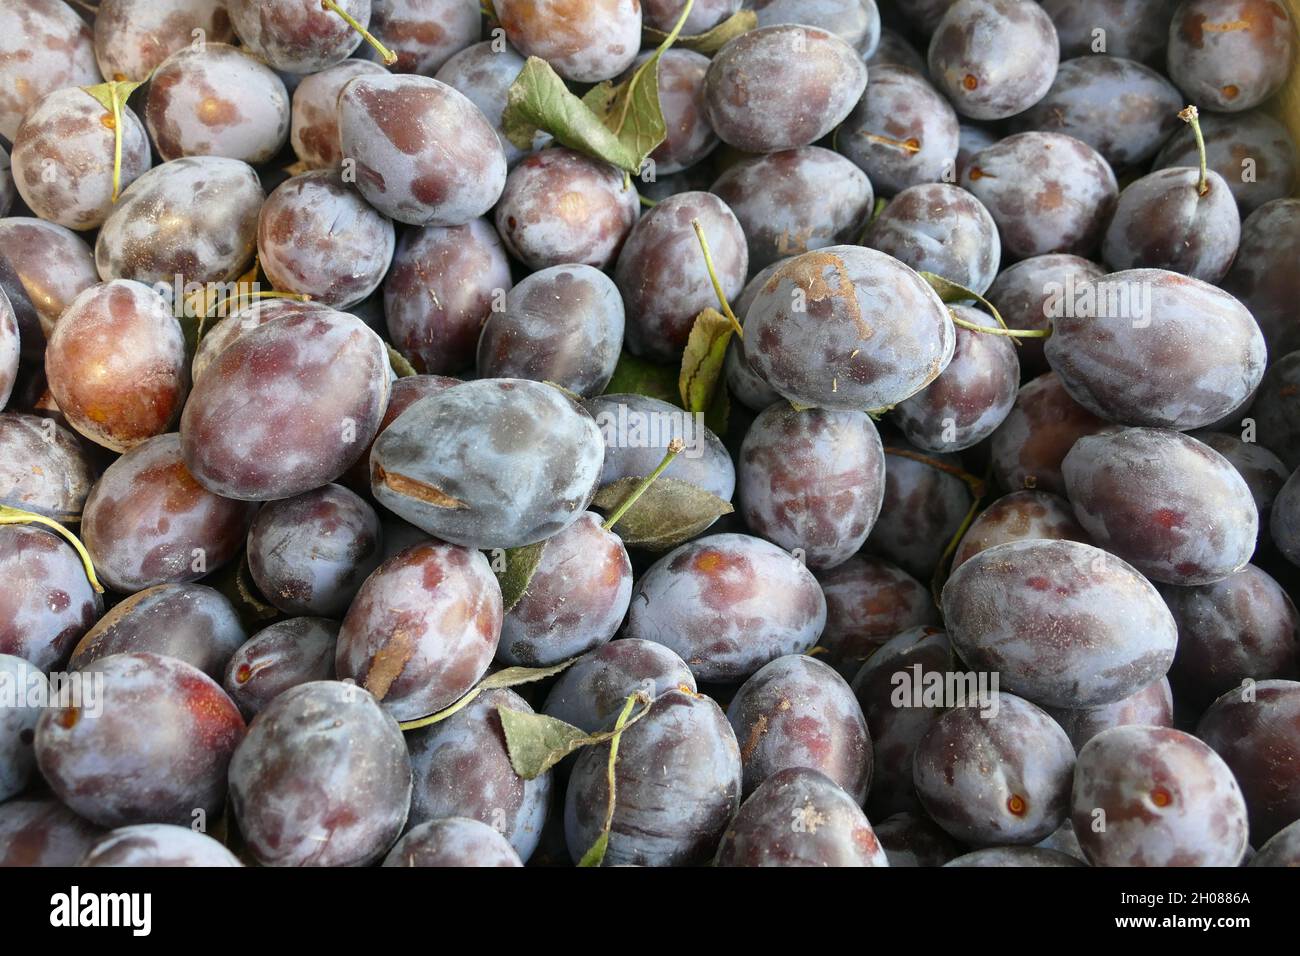 Authentic organic plums, close up. Stock Photo